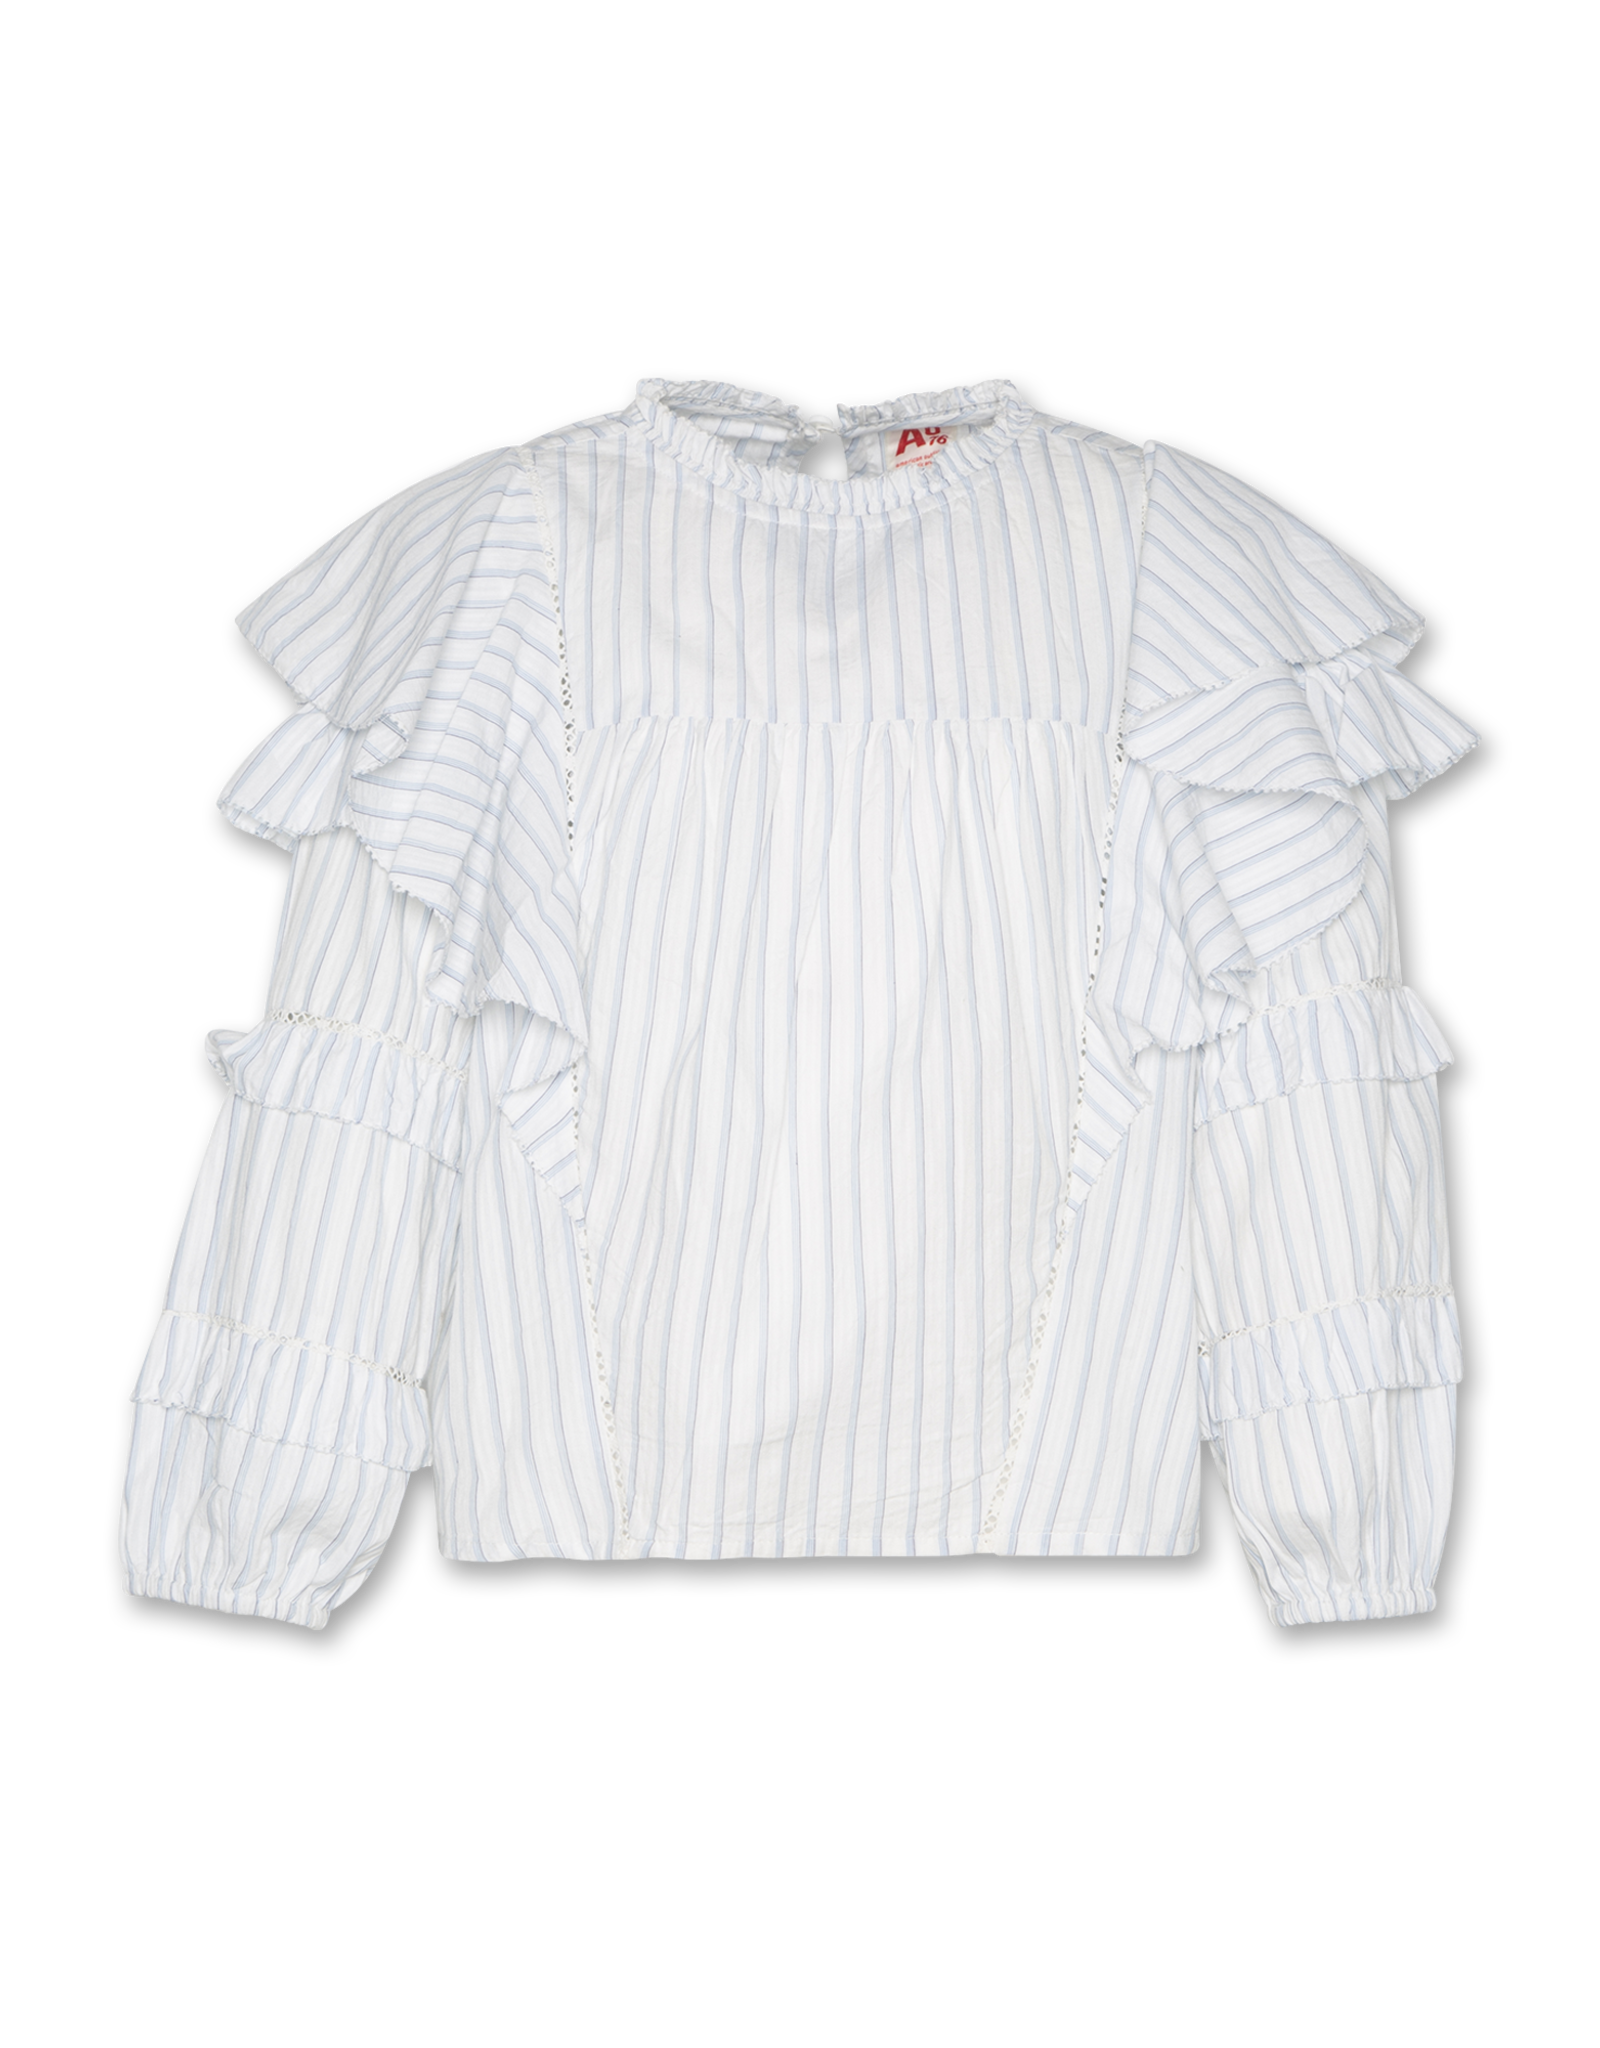 AMERICAN OUTFITTERS Ao76 Ally stripe shirt